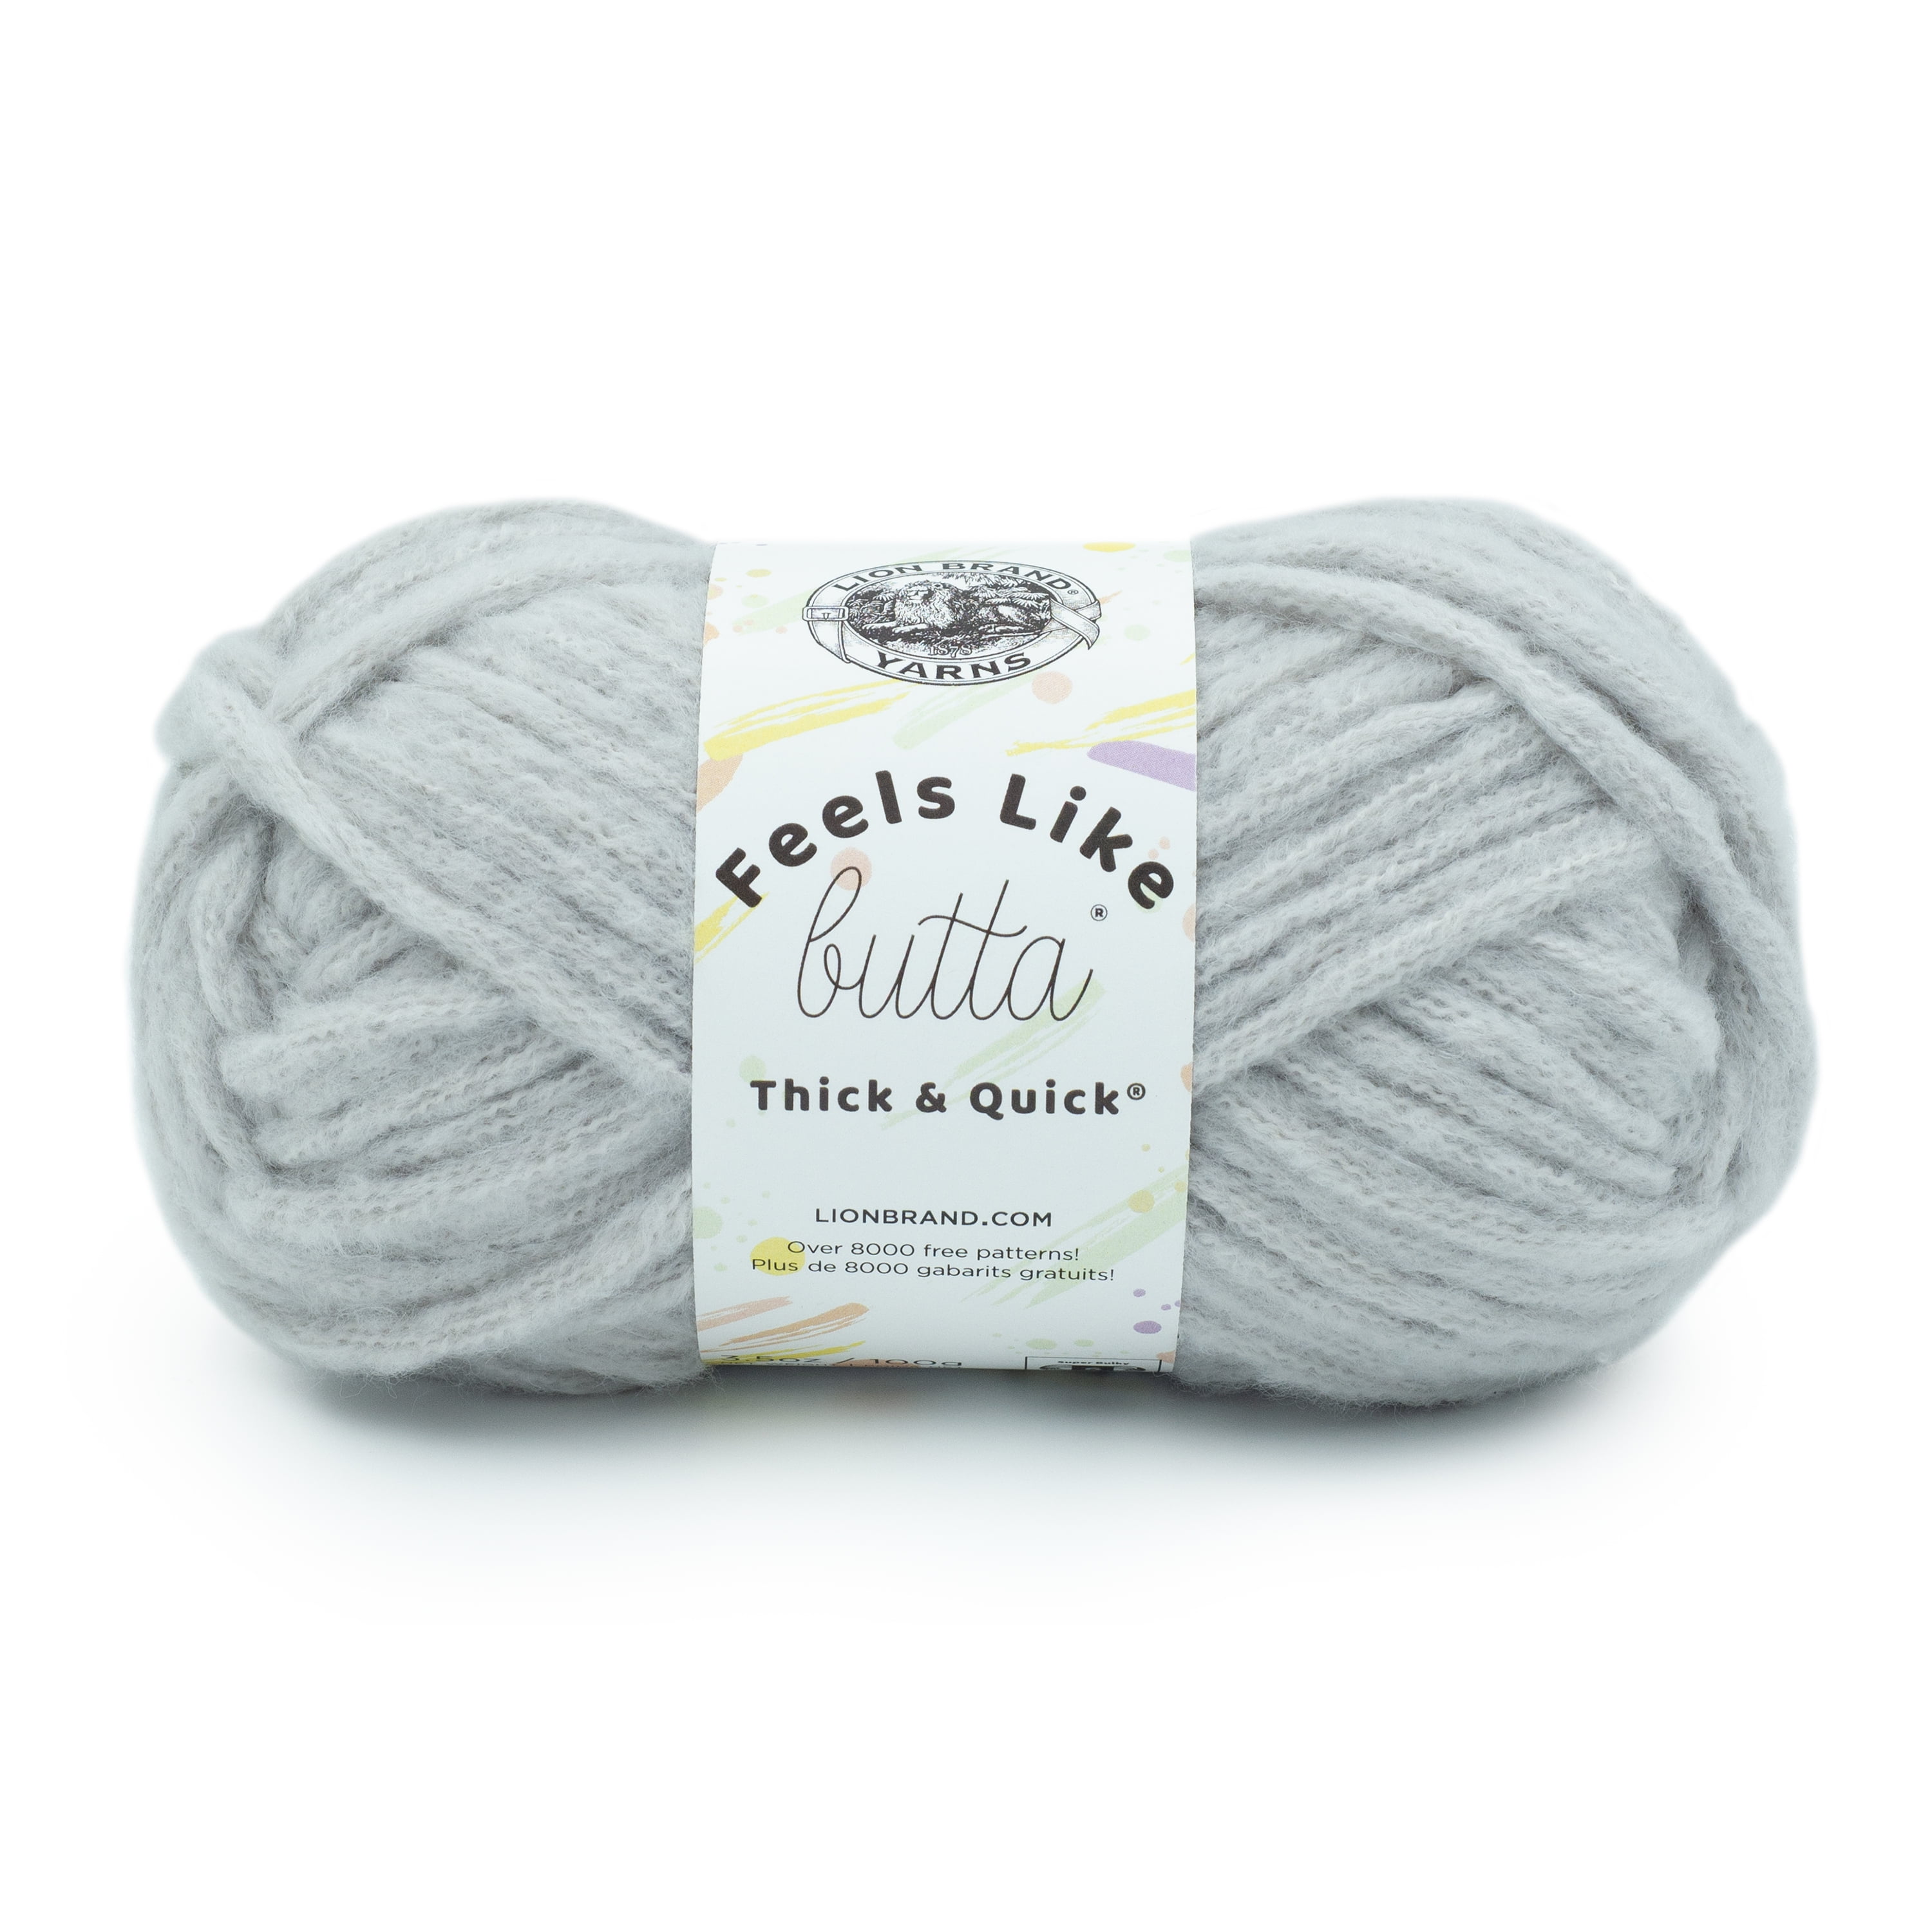 Lion Brand Feels Like Butta Thick & Quick Yarn-Antique White 